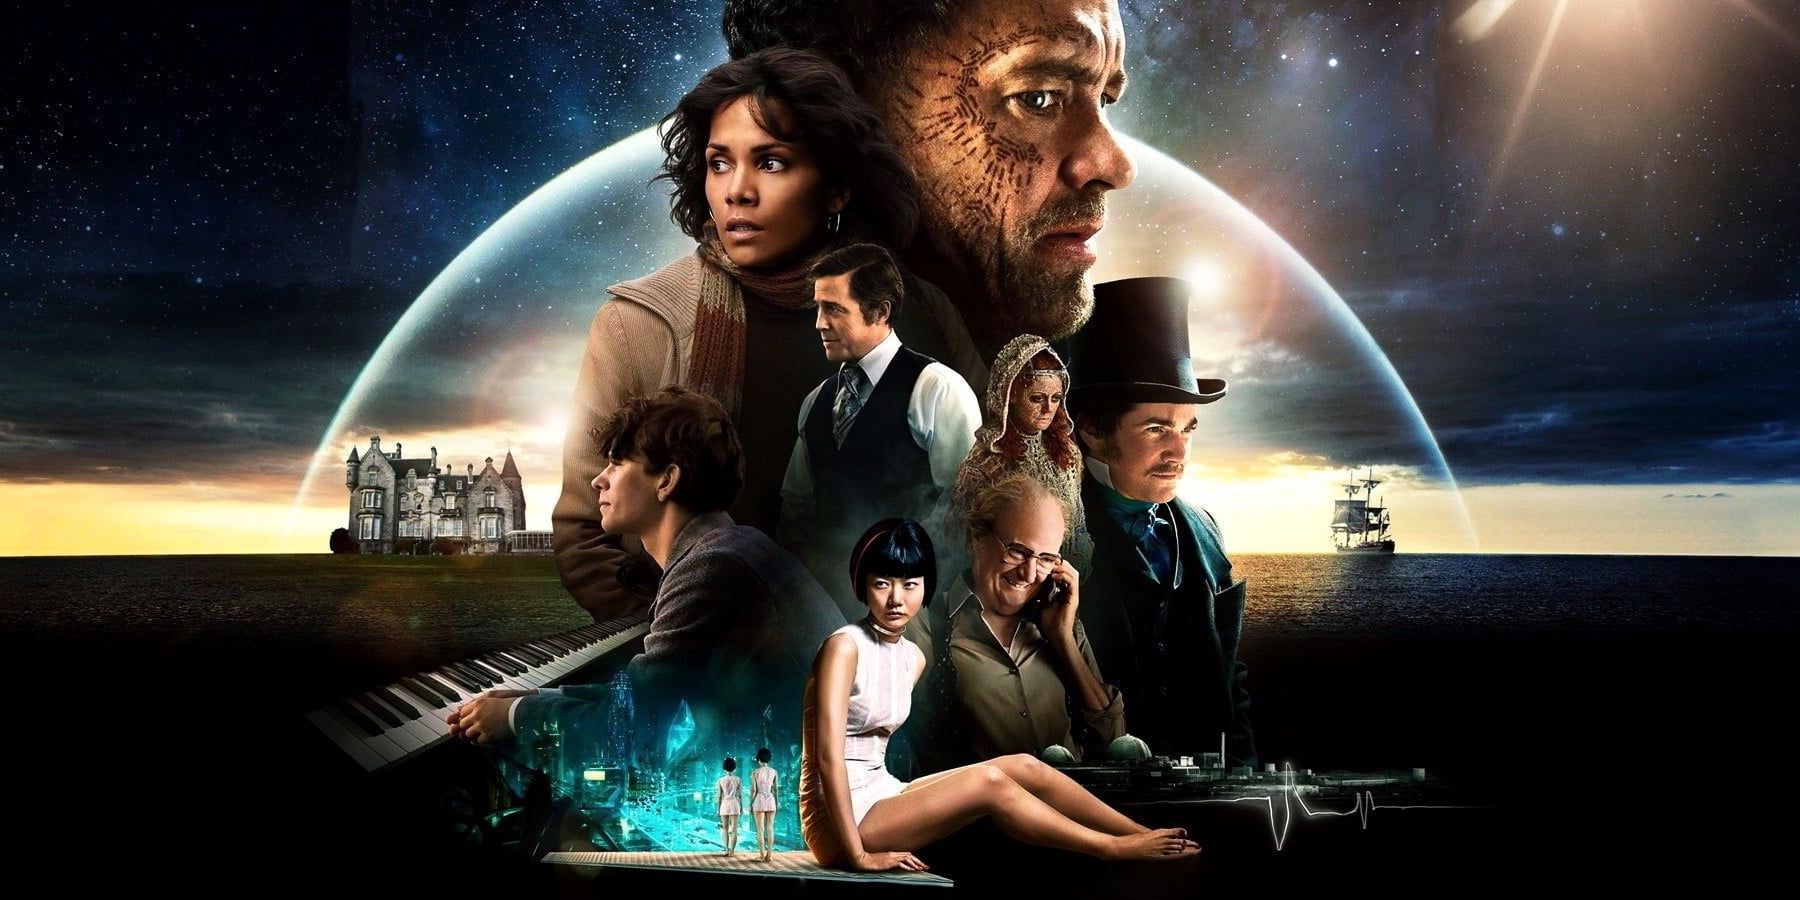 A poster showing off the ensemble cast of the film Cloud Atlas